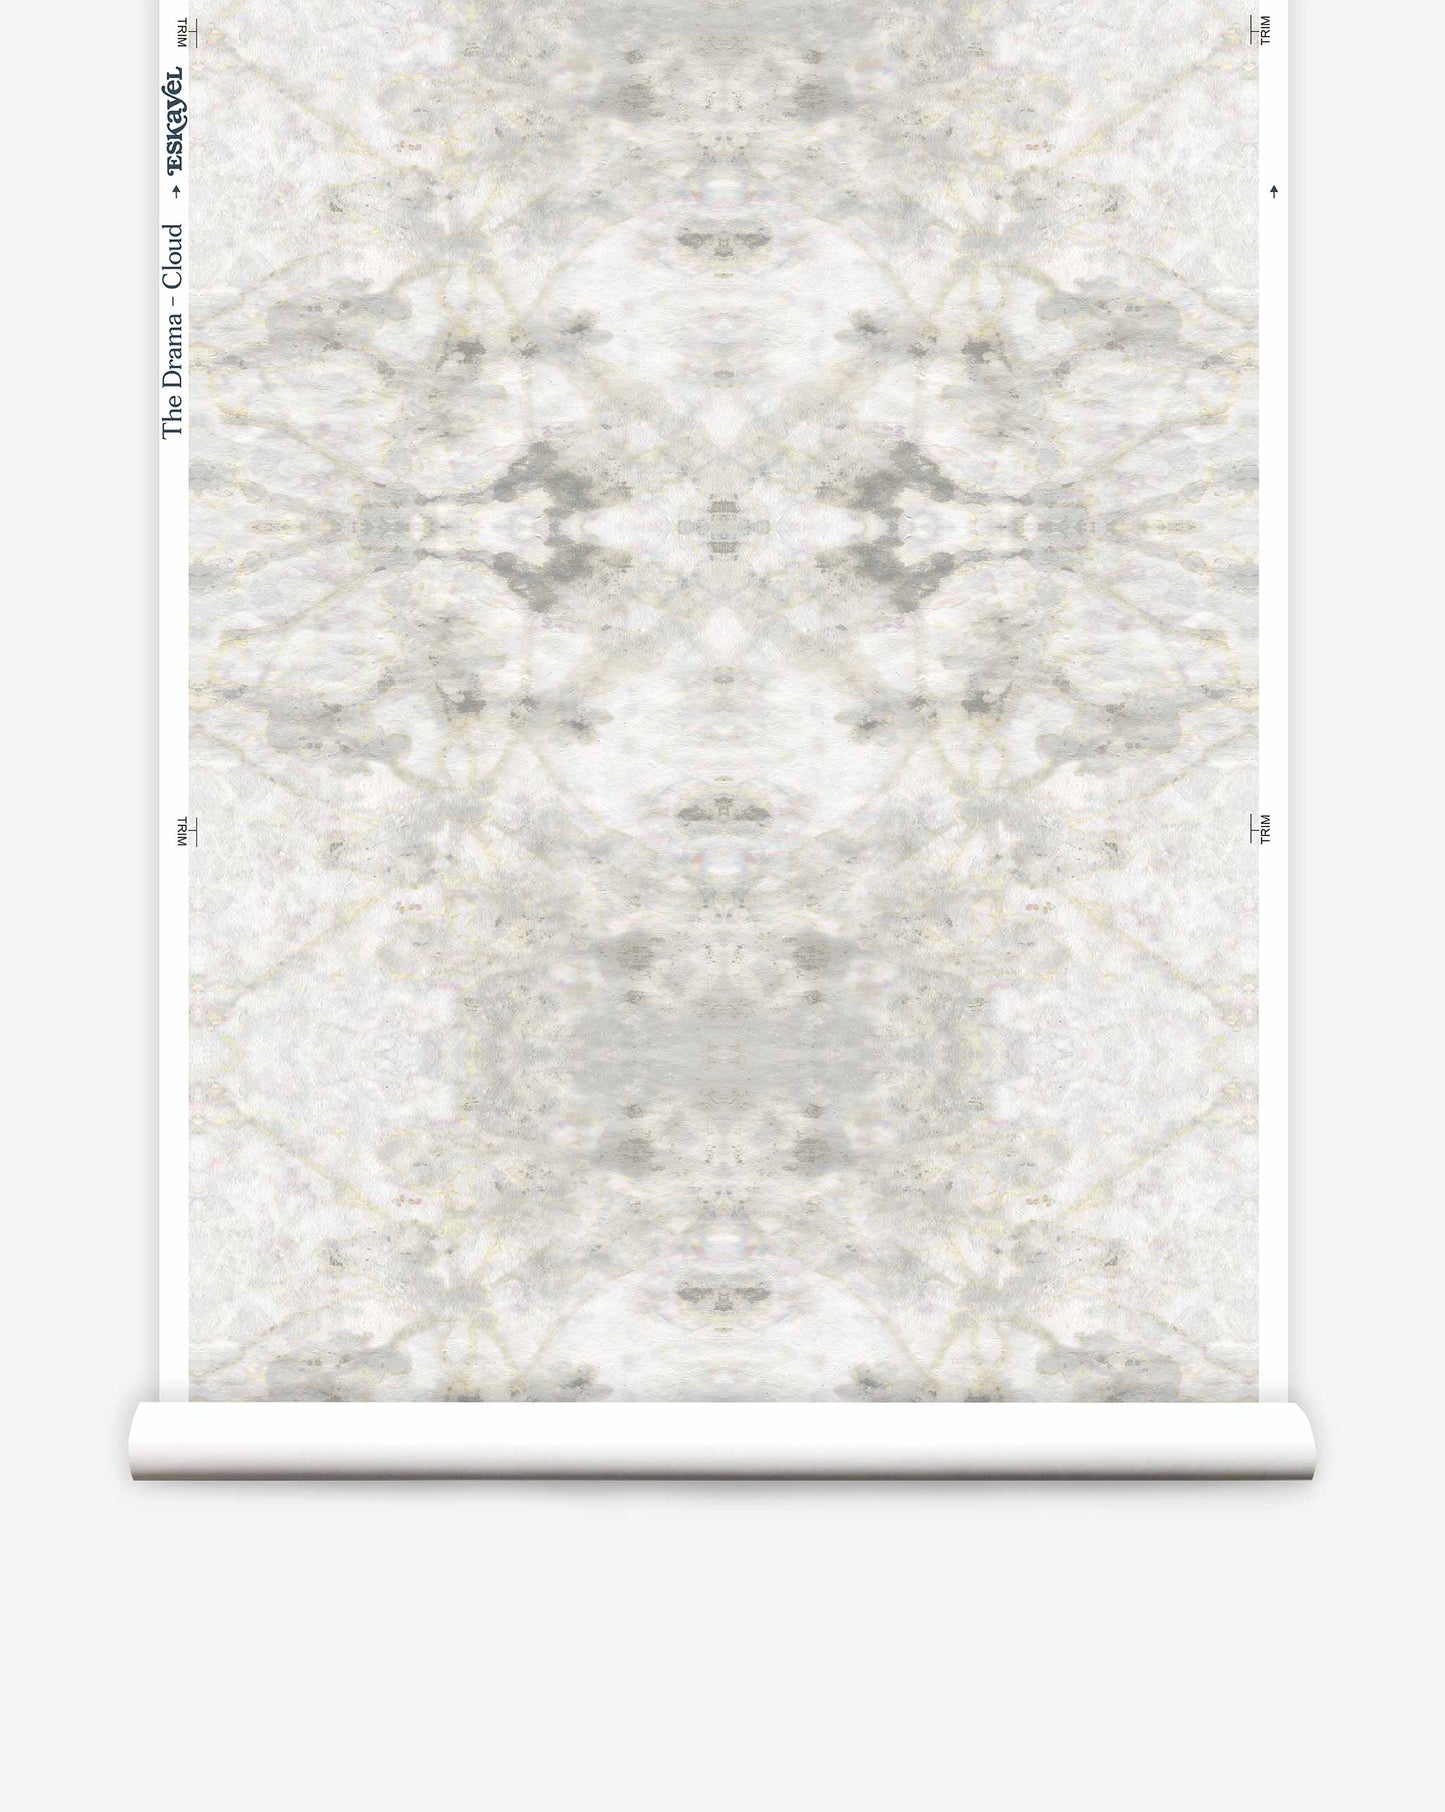 A roll of The Drama Wallpaper||Cloud with a symmetrical, abstract gray and white pattern, displayed unrolled against a plain background.